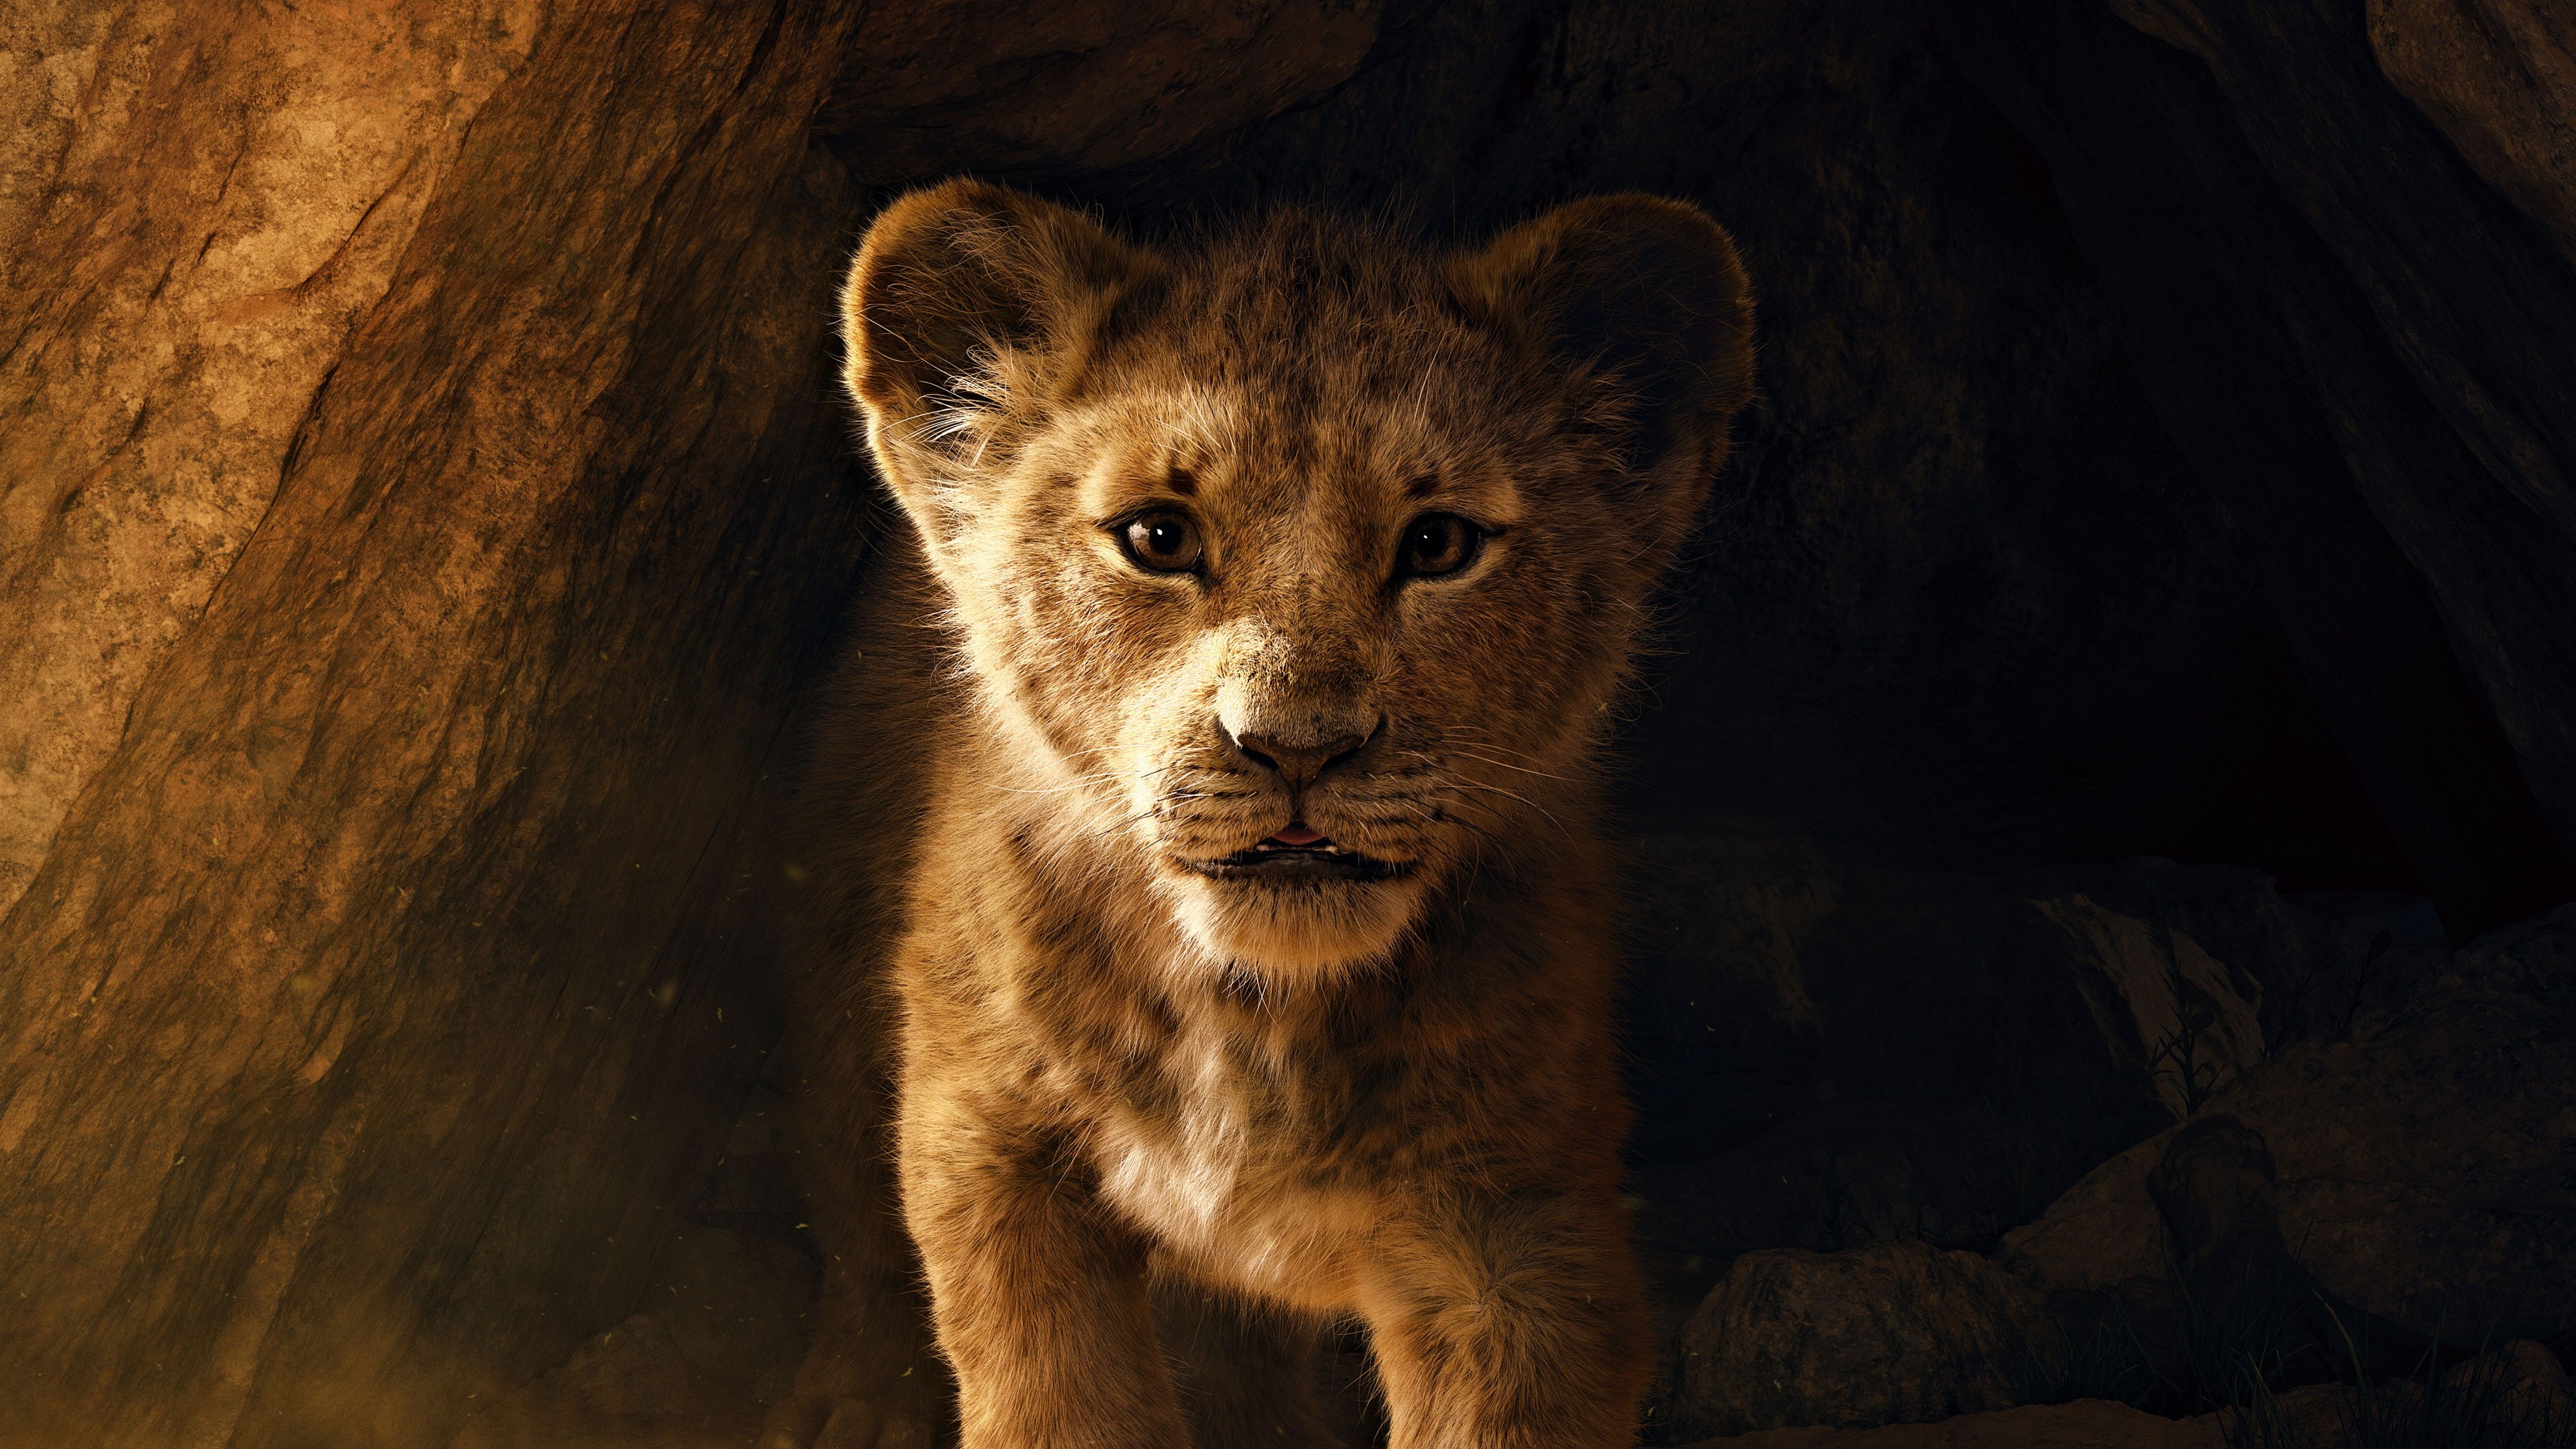 A lion cub is standing in the dark - The Lion King